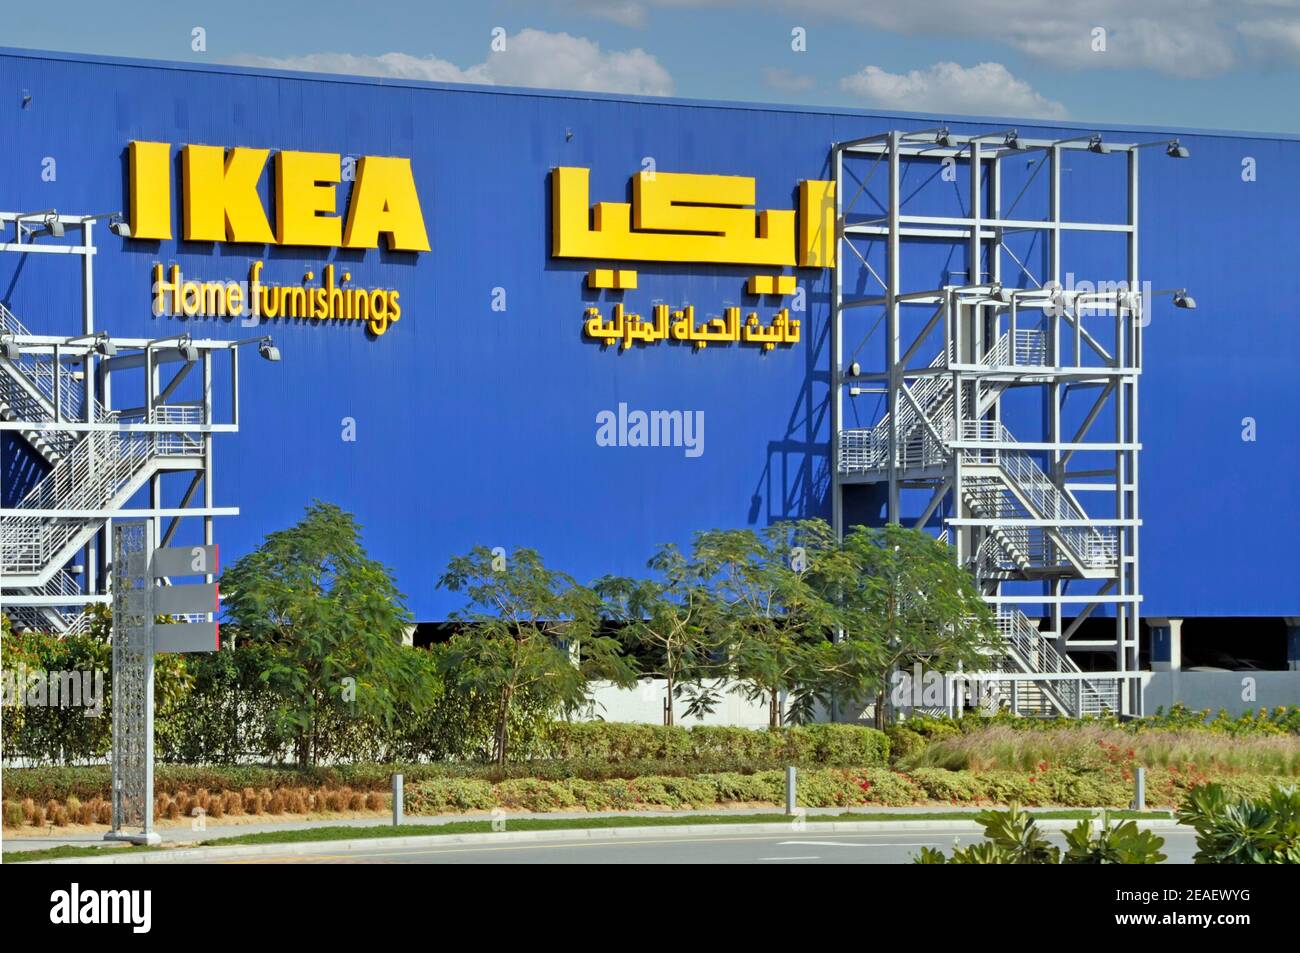 Dubai Ikea home furnishing store in modern building with bilingual Arabic signs & iconic logo external fire escape staircase United Arab Emirates UAE Stock Photo